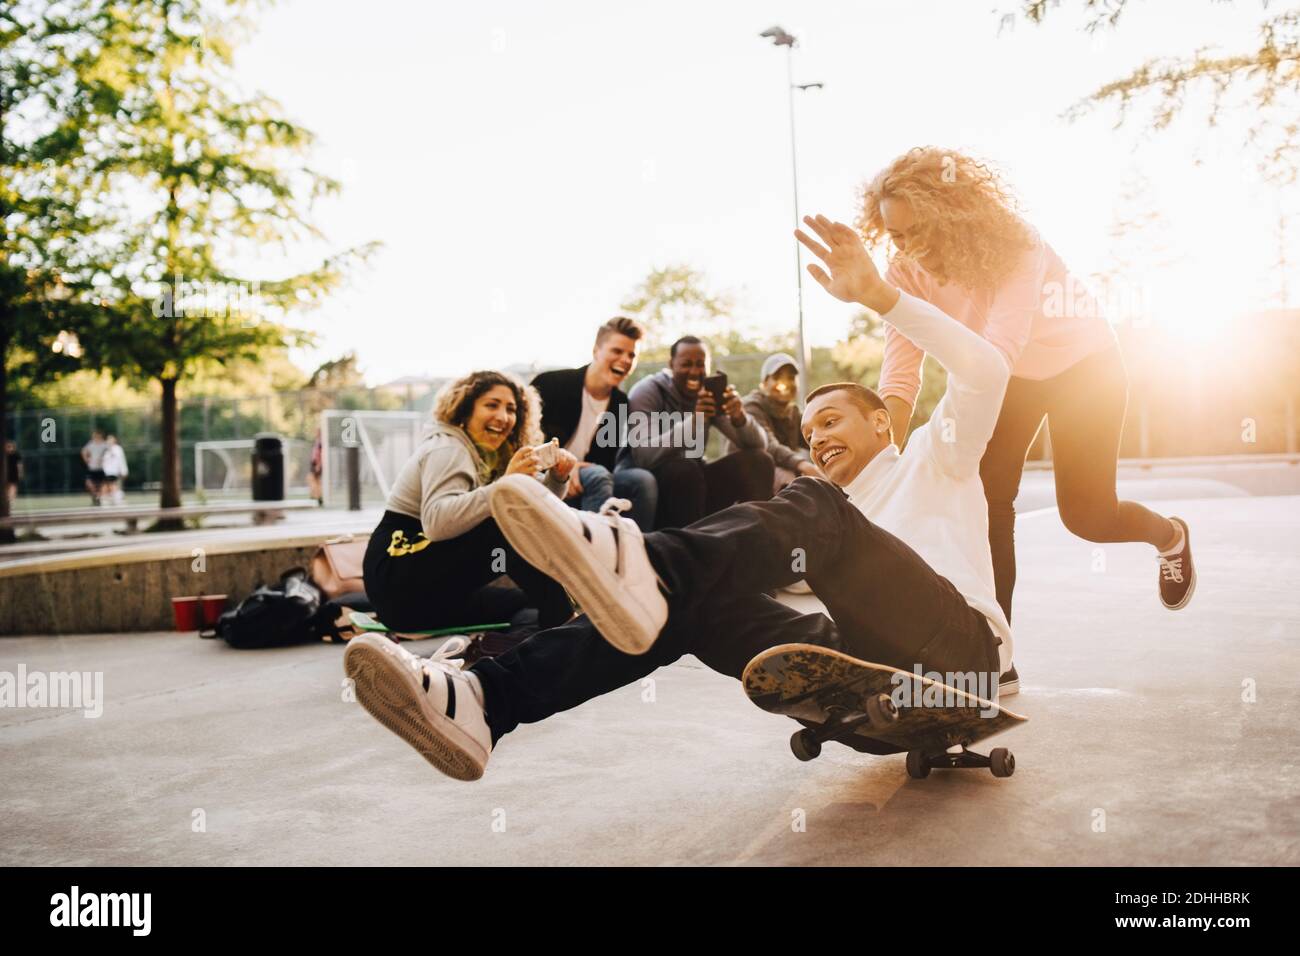 Laughing friends photographing man falling from skateboard while woman pushing him at park Stock Photo